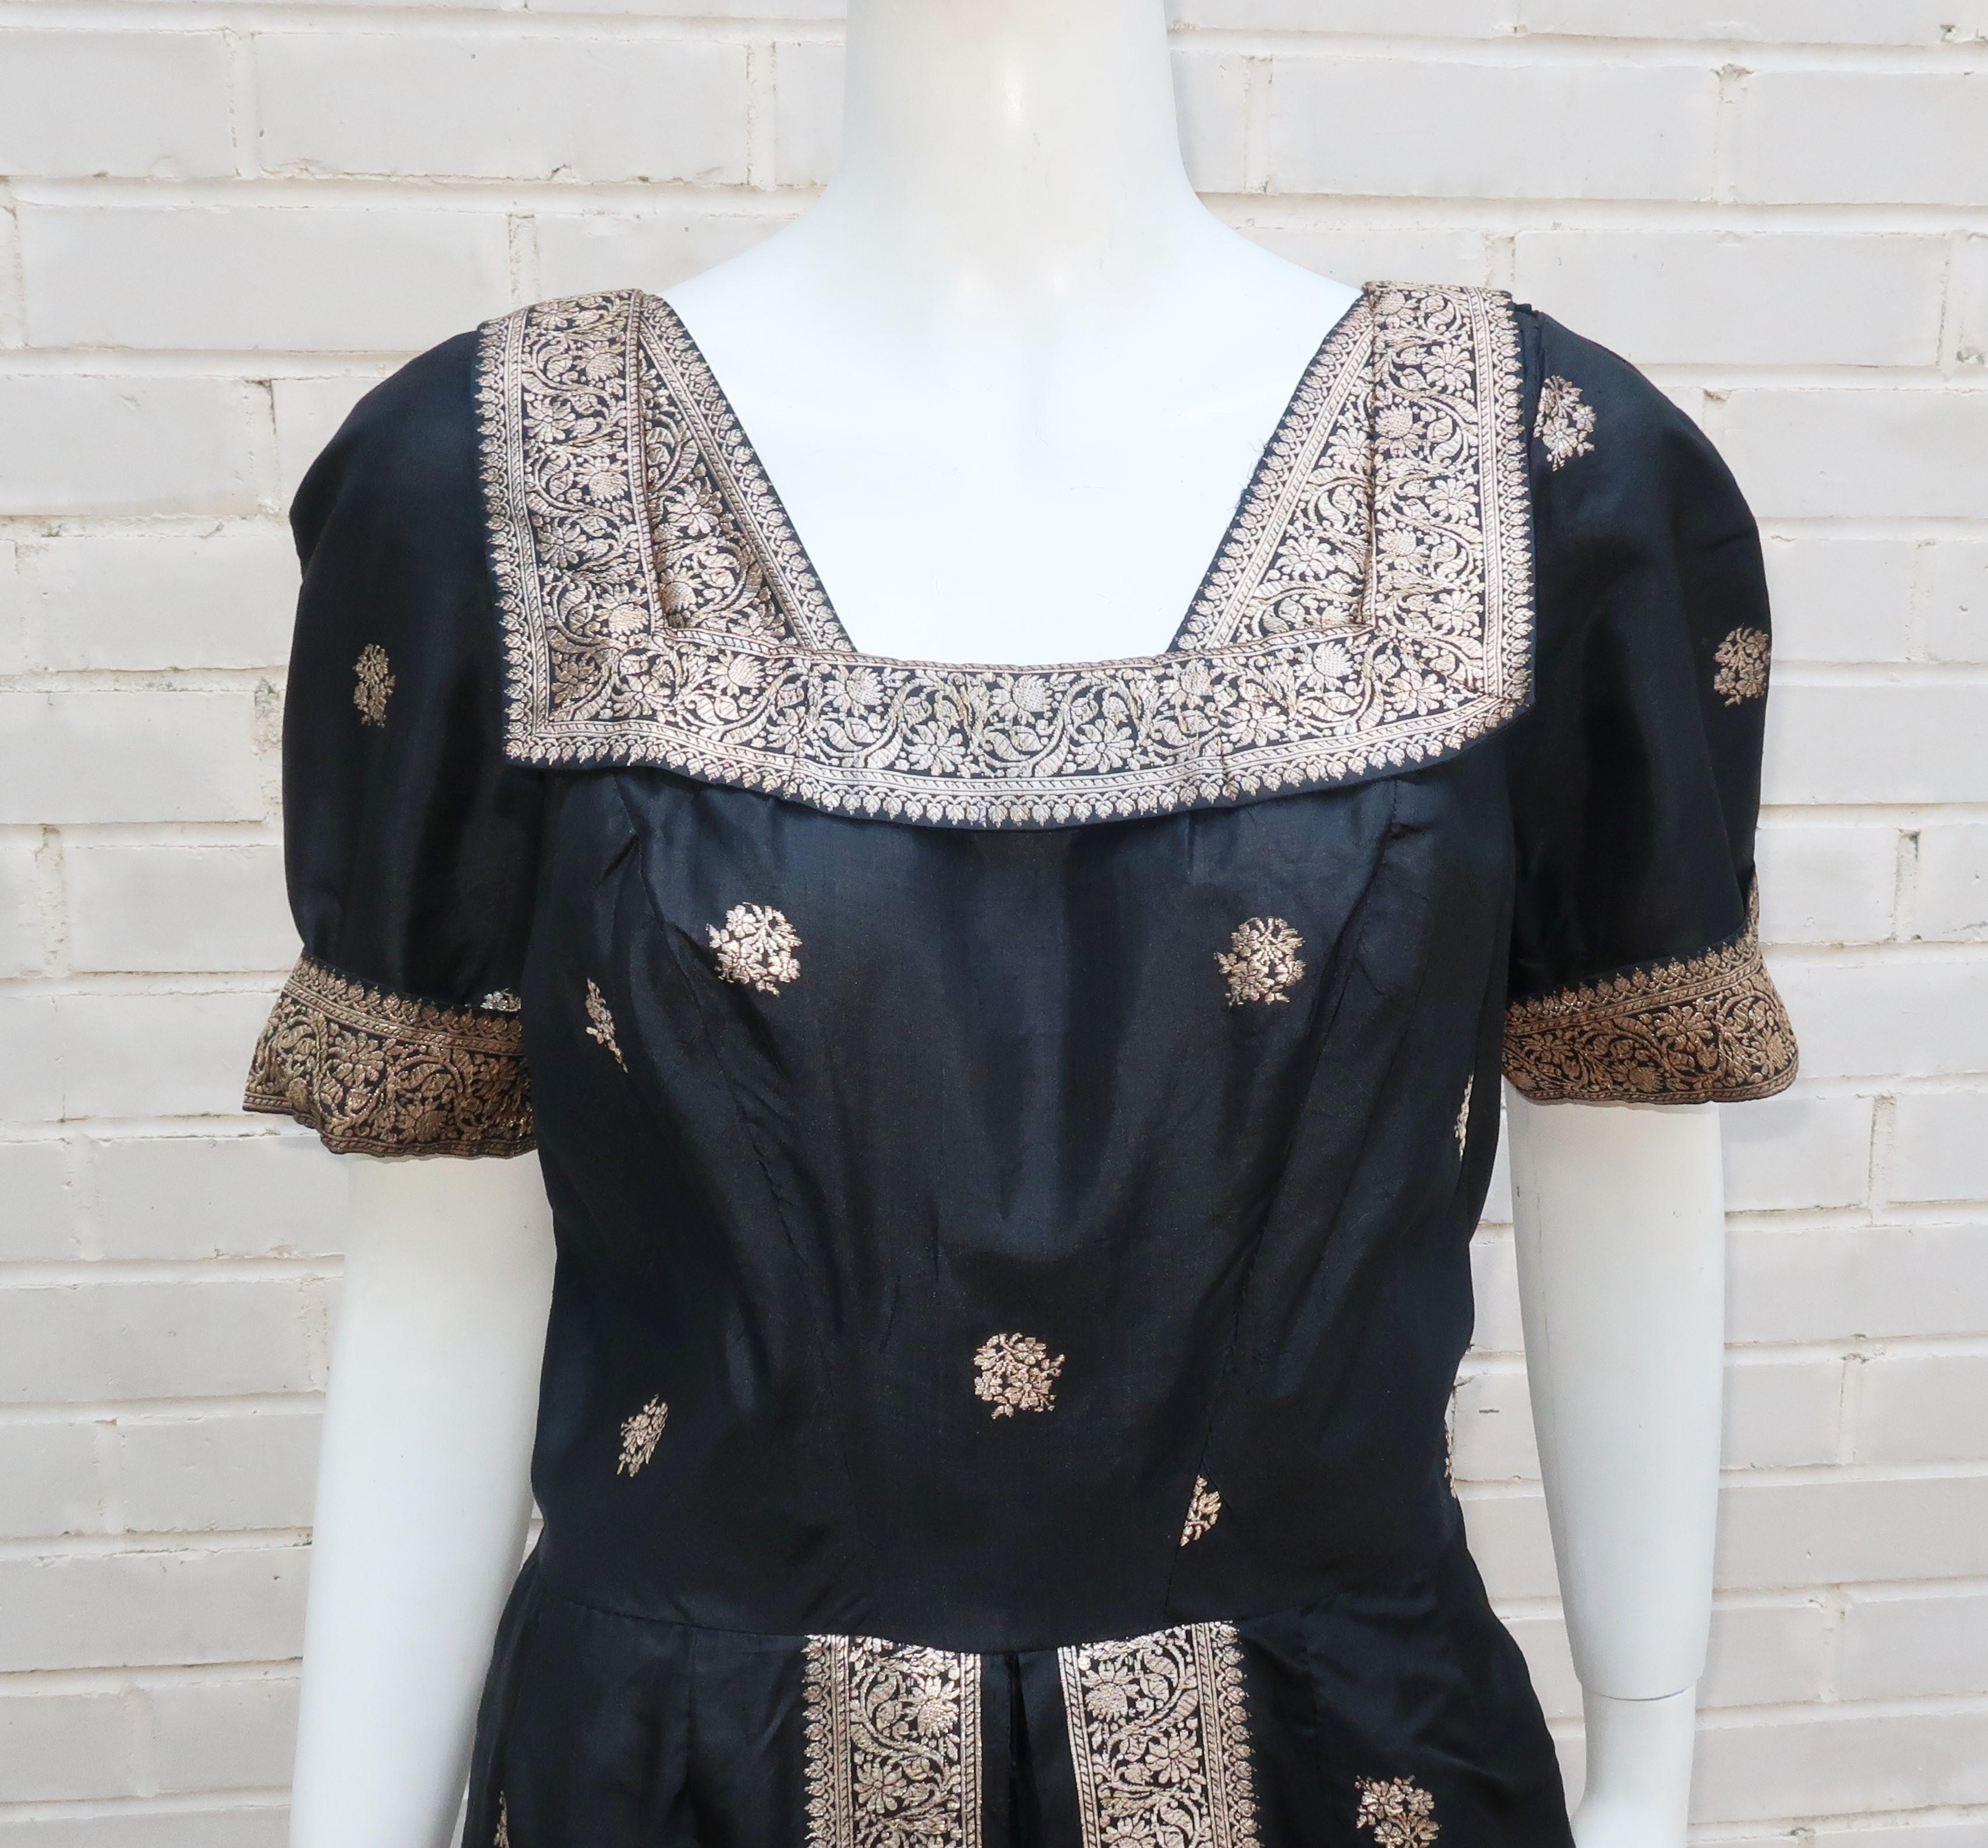 1950's cocktail dress in a black silk sari fabric with platinum paisley metallic accents.  The dress zips under one arm and features inverted pleating hidden under front flaps and a neckline embellished with a square collar at front and back.  No